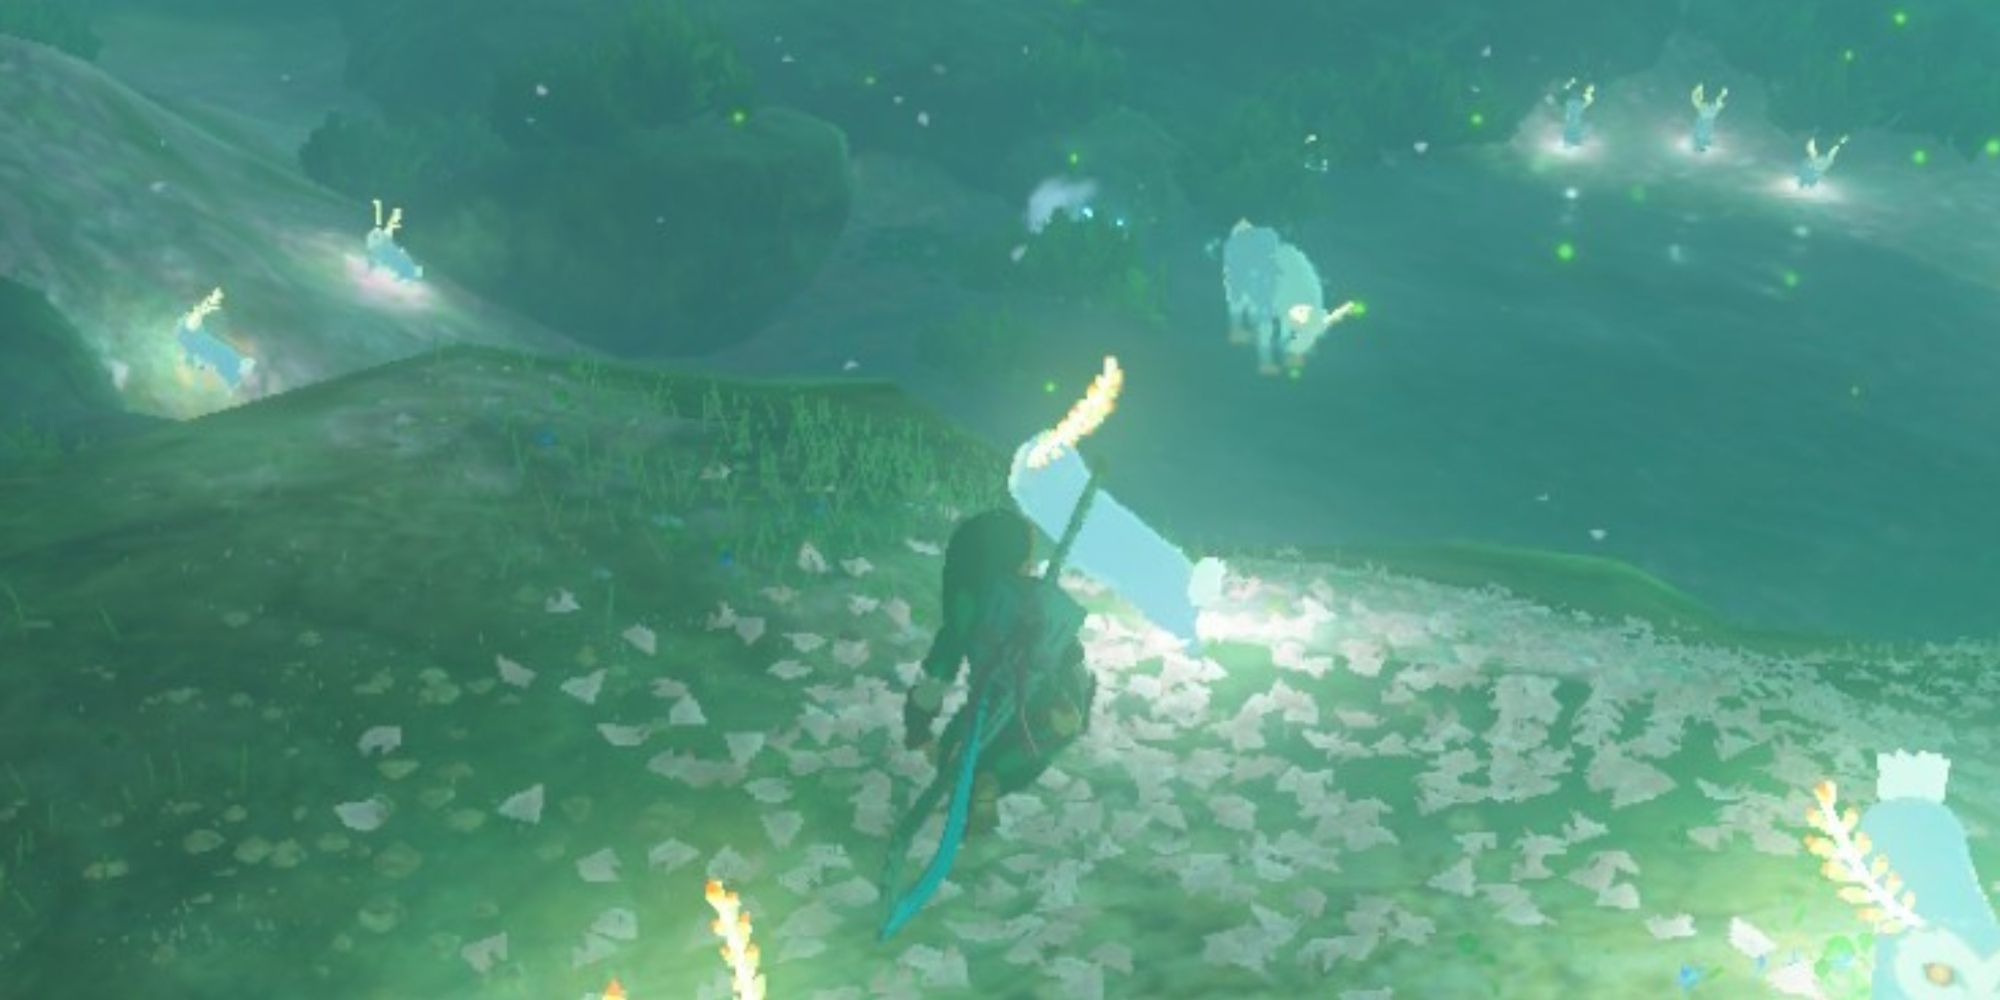 Link surrounded by Blupees at Satori Mountain in BOTW